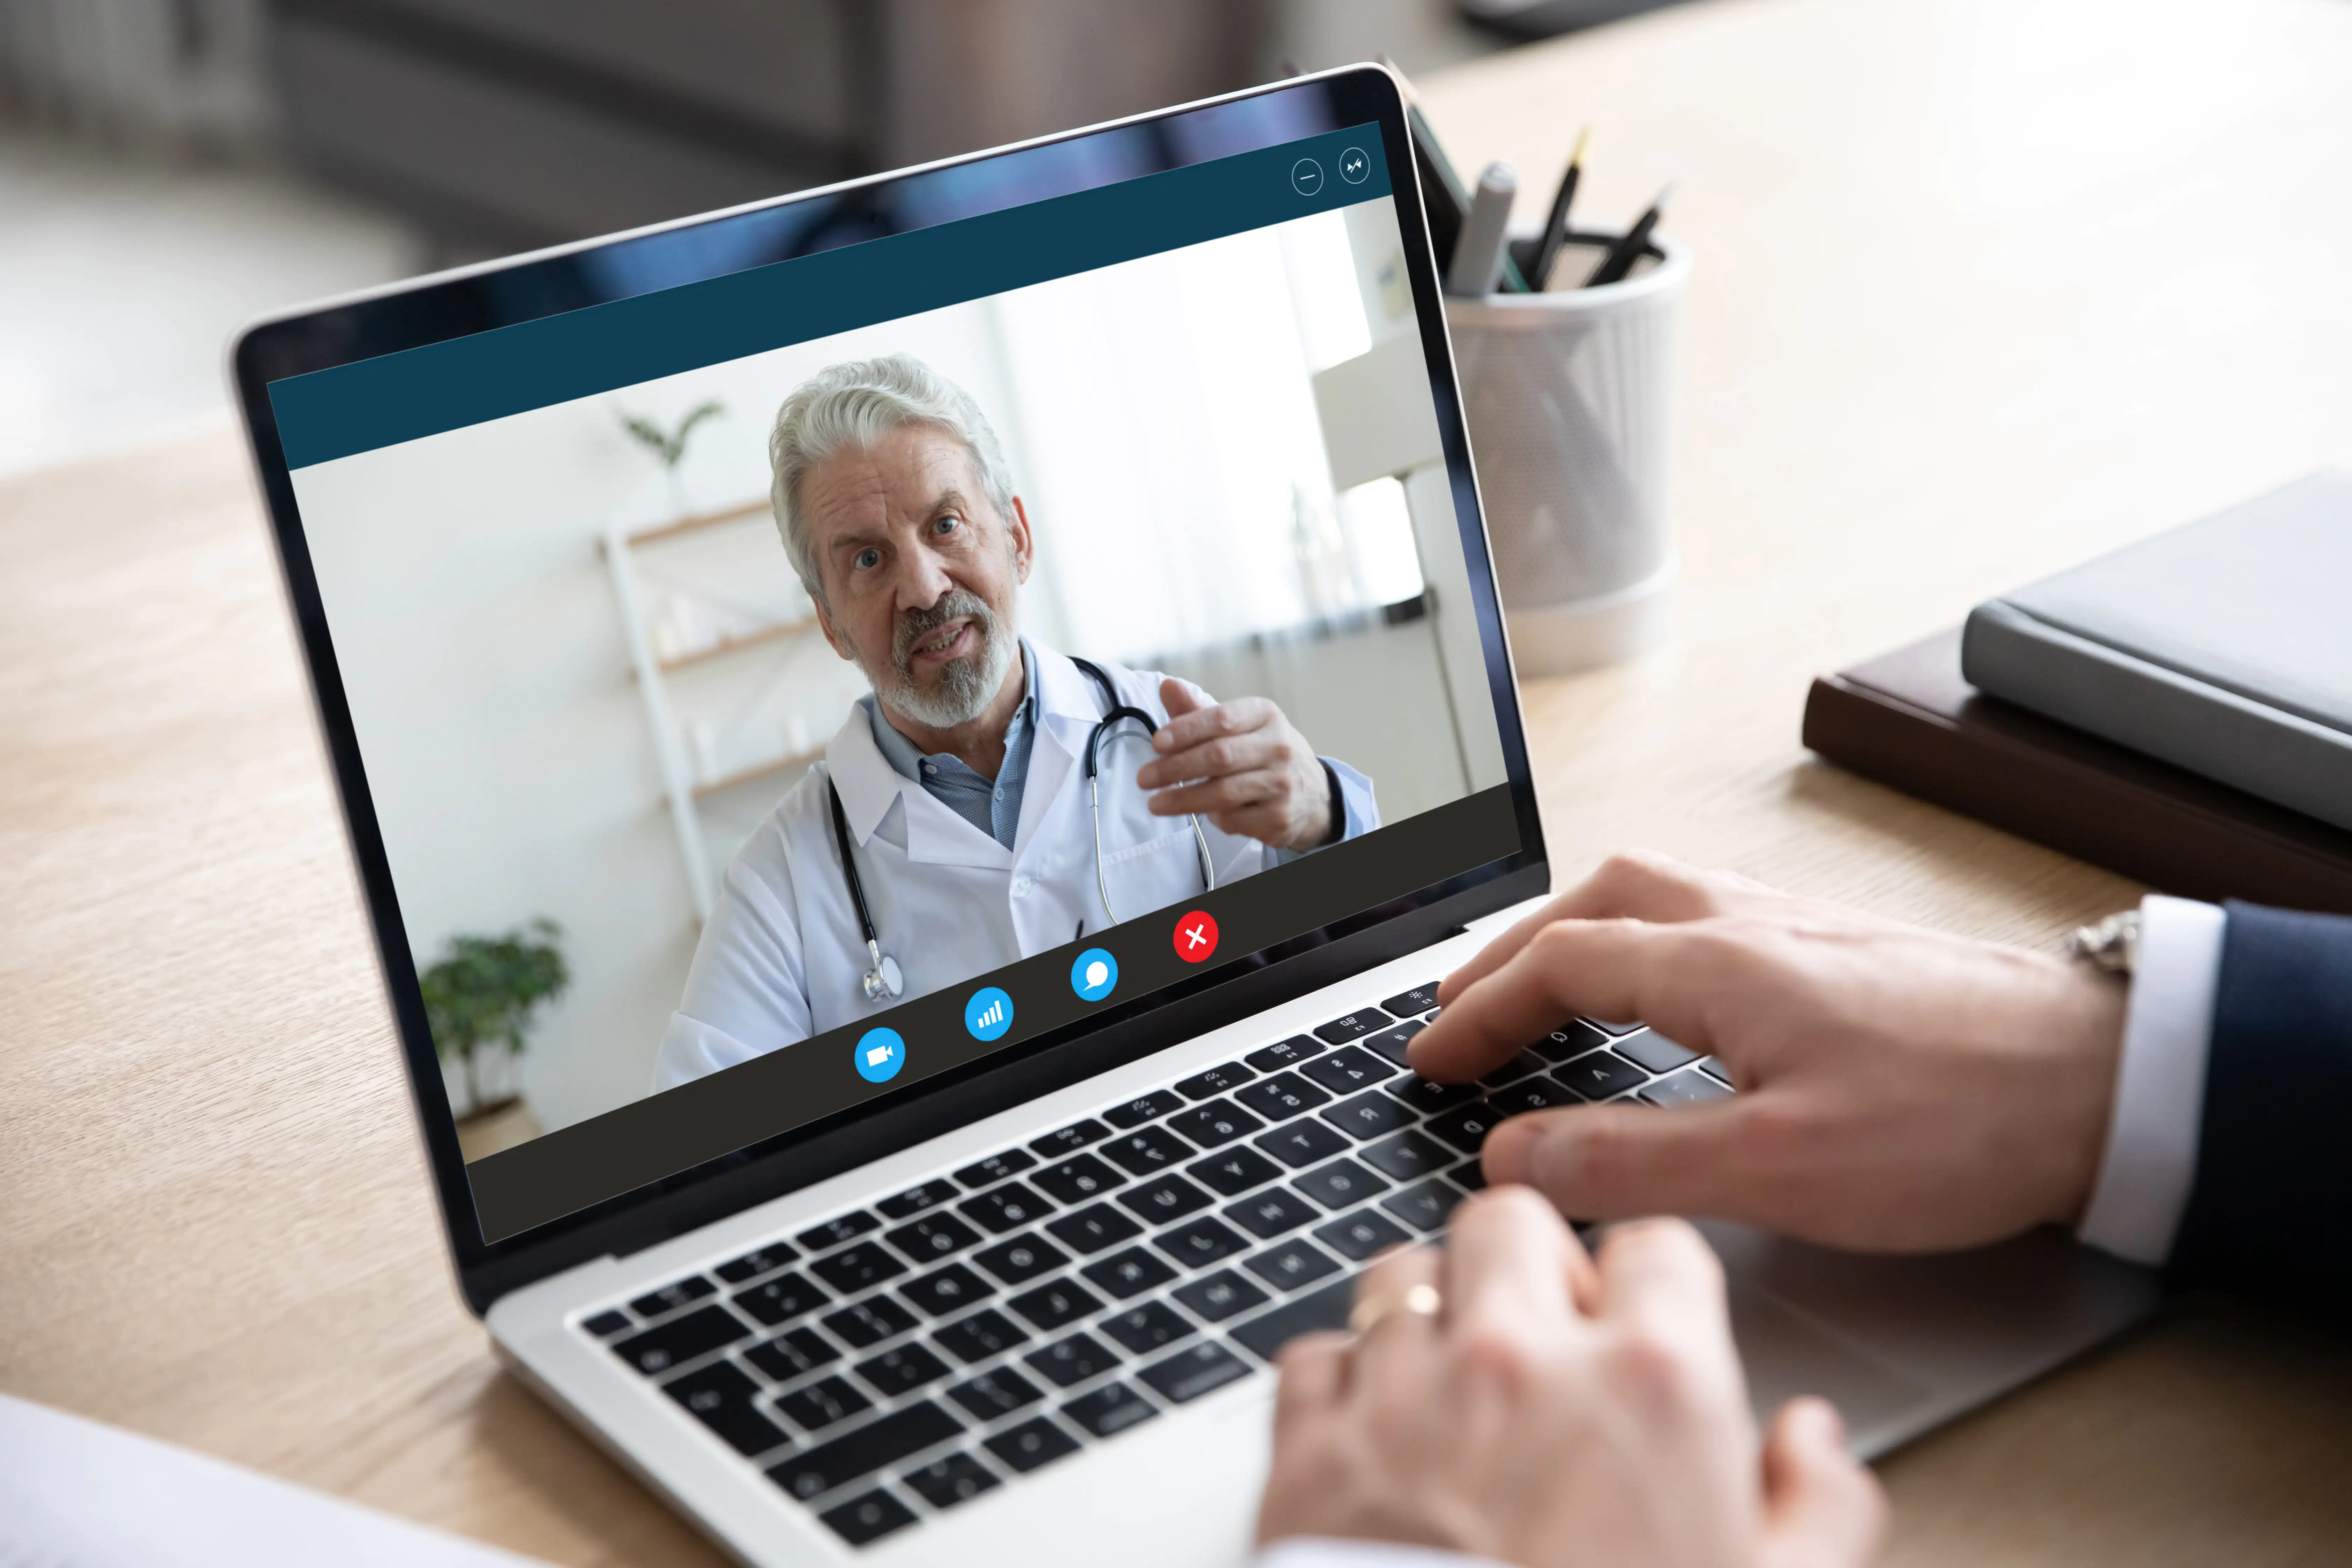 5 Ways Pharmaceutical Sales Reps Can Engage Better with Physicians Virtually